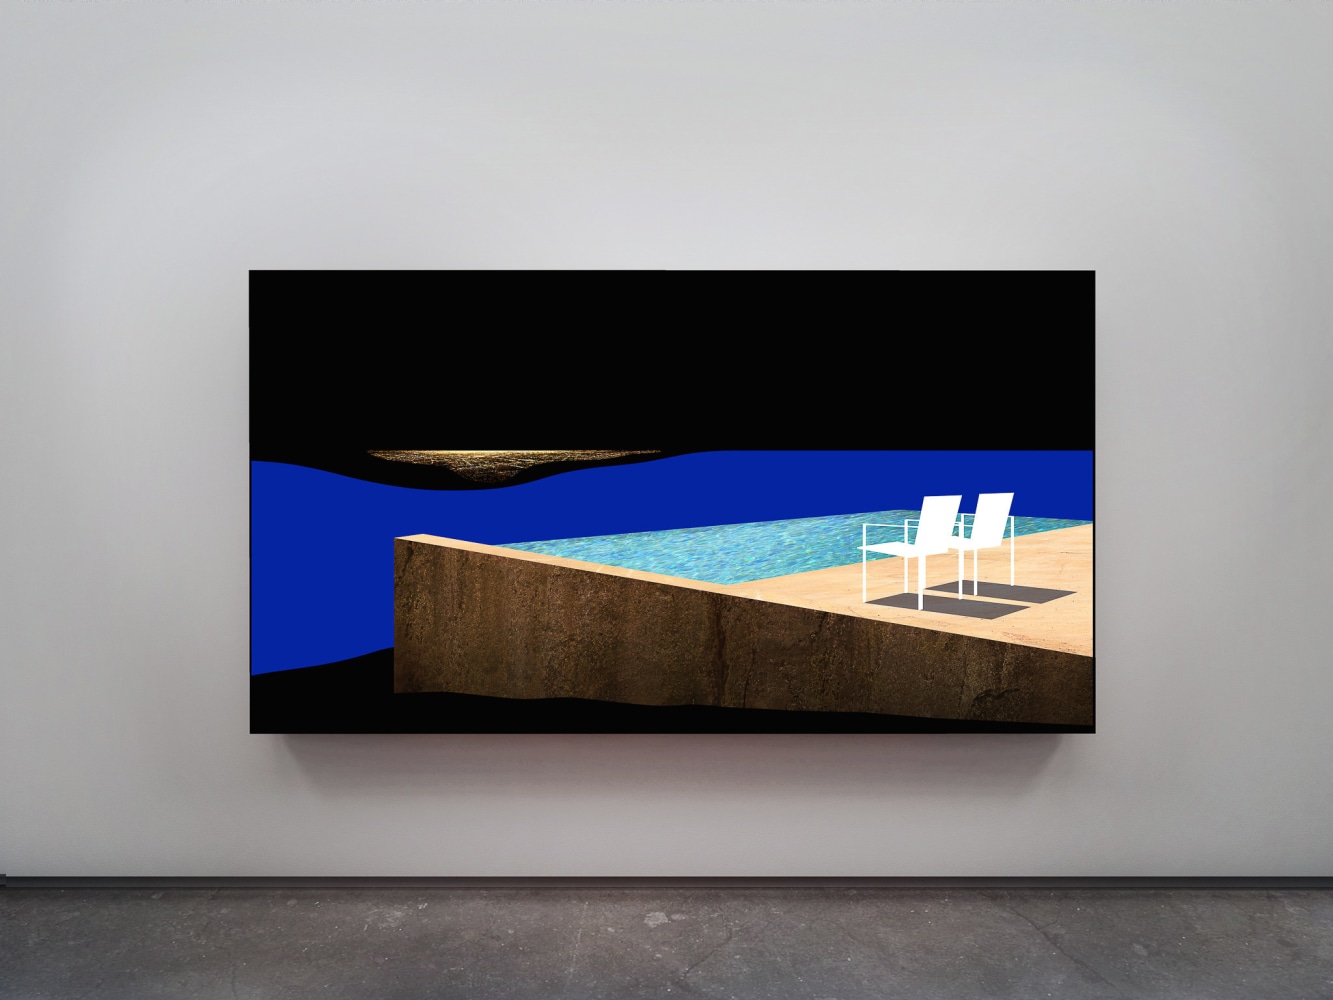 Doug Aitken

Shock and Awe (two chairs and pool)&amp;nbsp;

2019

Chromogenic transparency on acrylic in aluminum lightbox with LEDs

67 3/4 x 124 1/2 x 7 1/8 inches (172.1 x 316.2 x 18.1 cm)

Edition of 4, with 2 AP

DA 660

&amp;nbsp;

&amp;nbsp;

INQUIRE